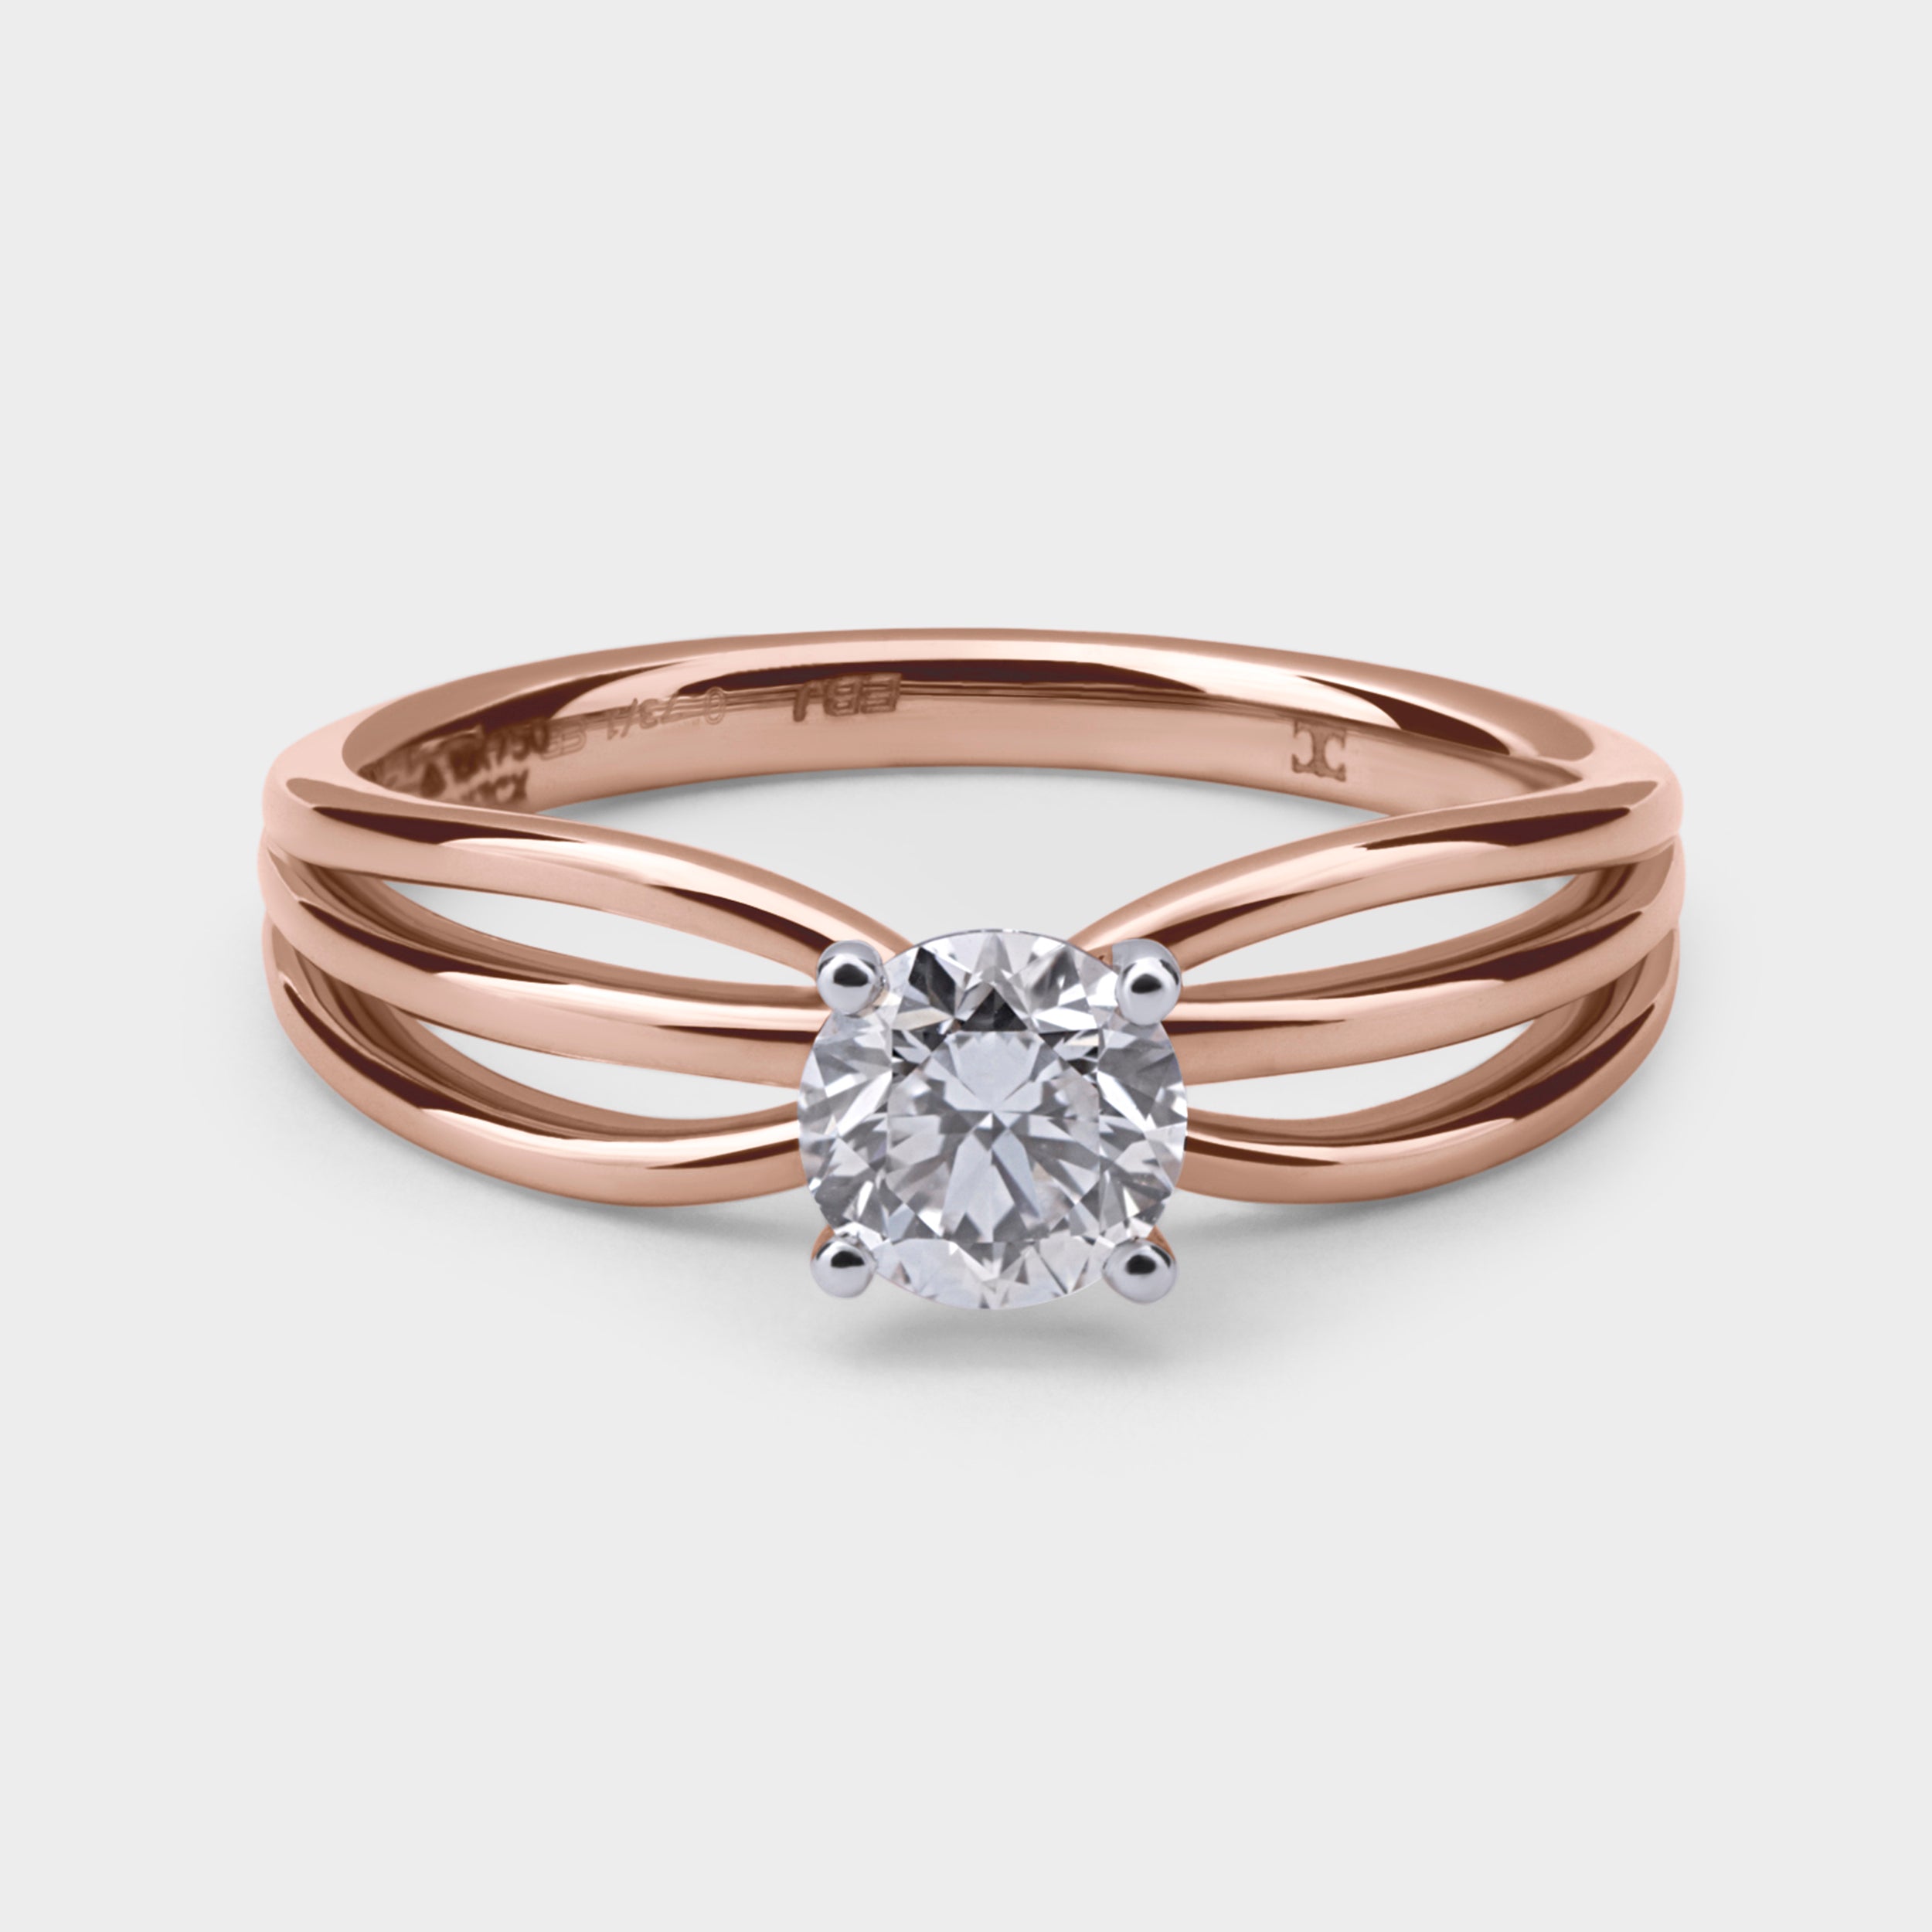 ROUND BRILLIANT 0.730 CARAT SOLITAIRE LAB-GROWN DIAMOND RING IN ROSE GOLD | SKU : 0019898728